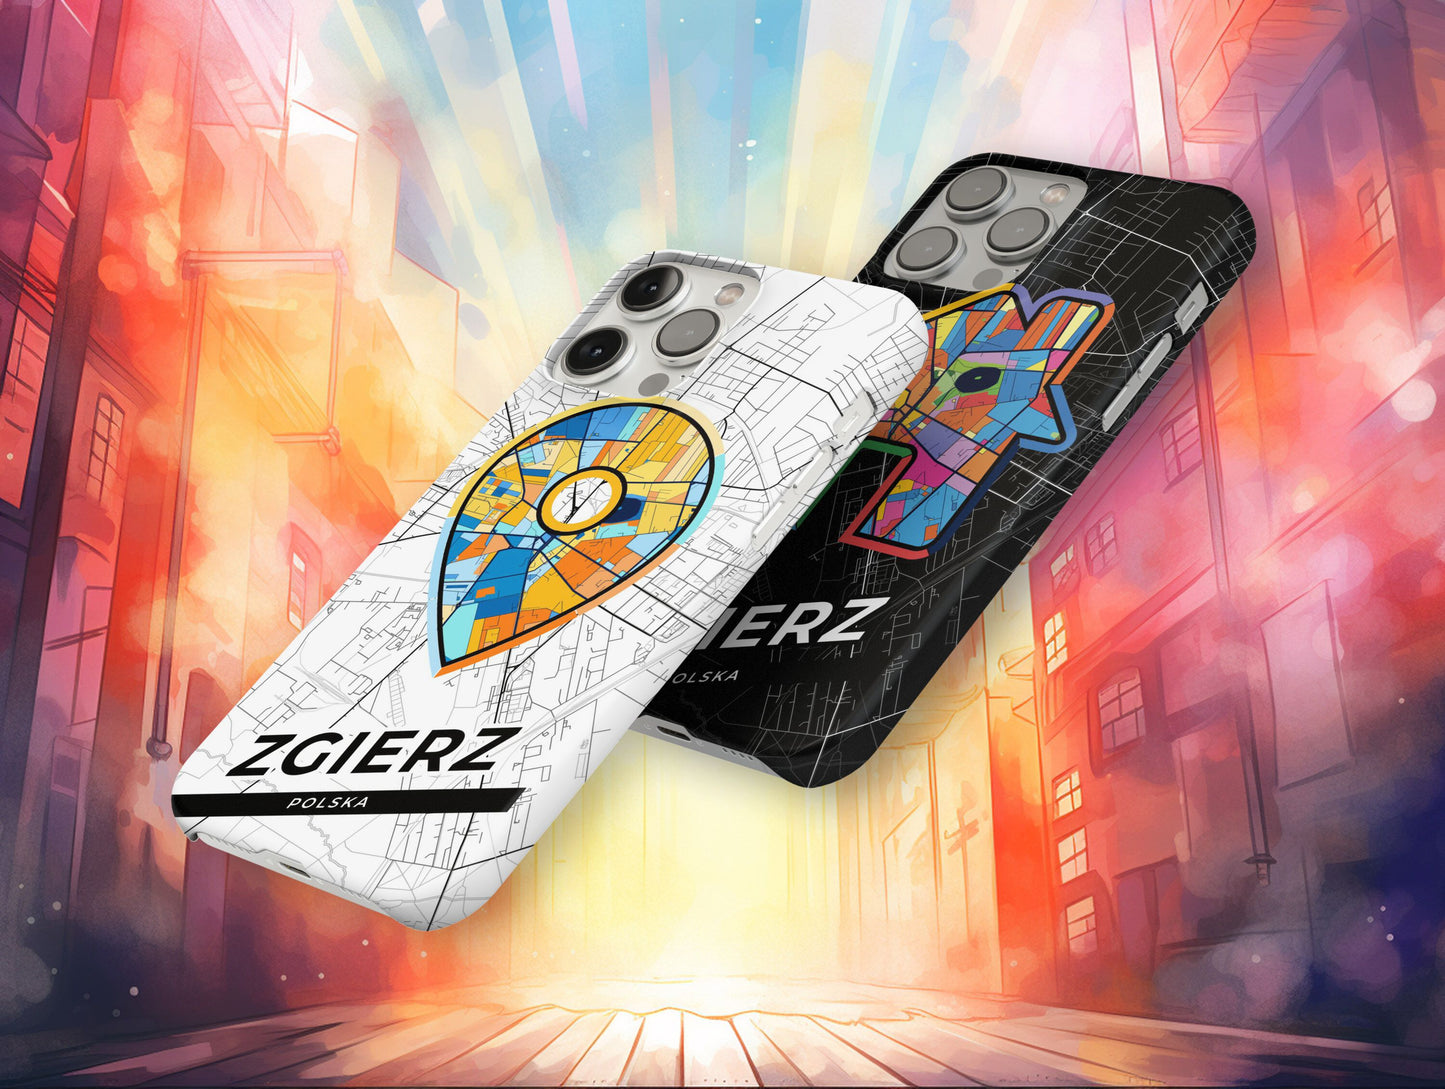 Zgierz Poland slim phone case with colorful icon